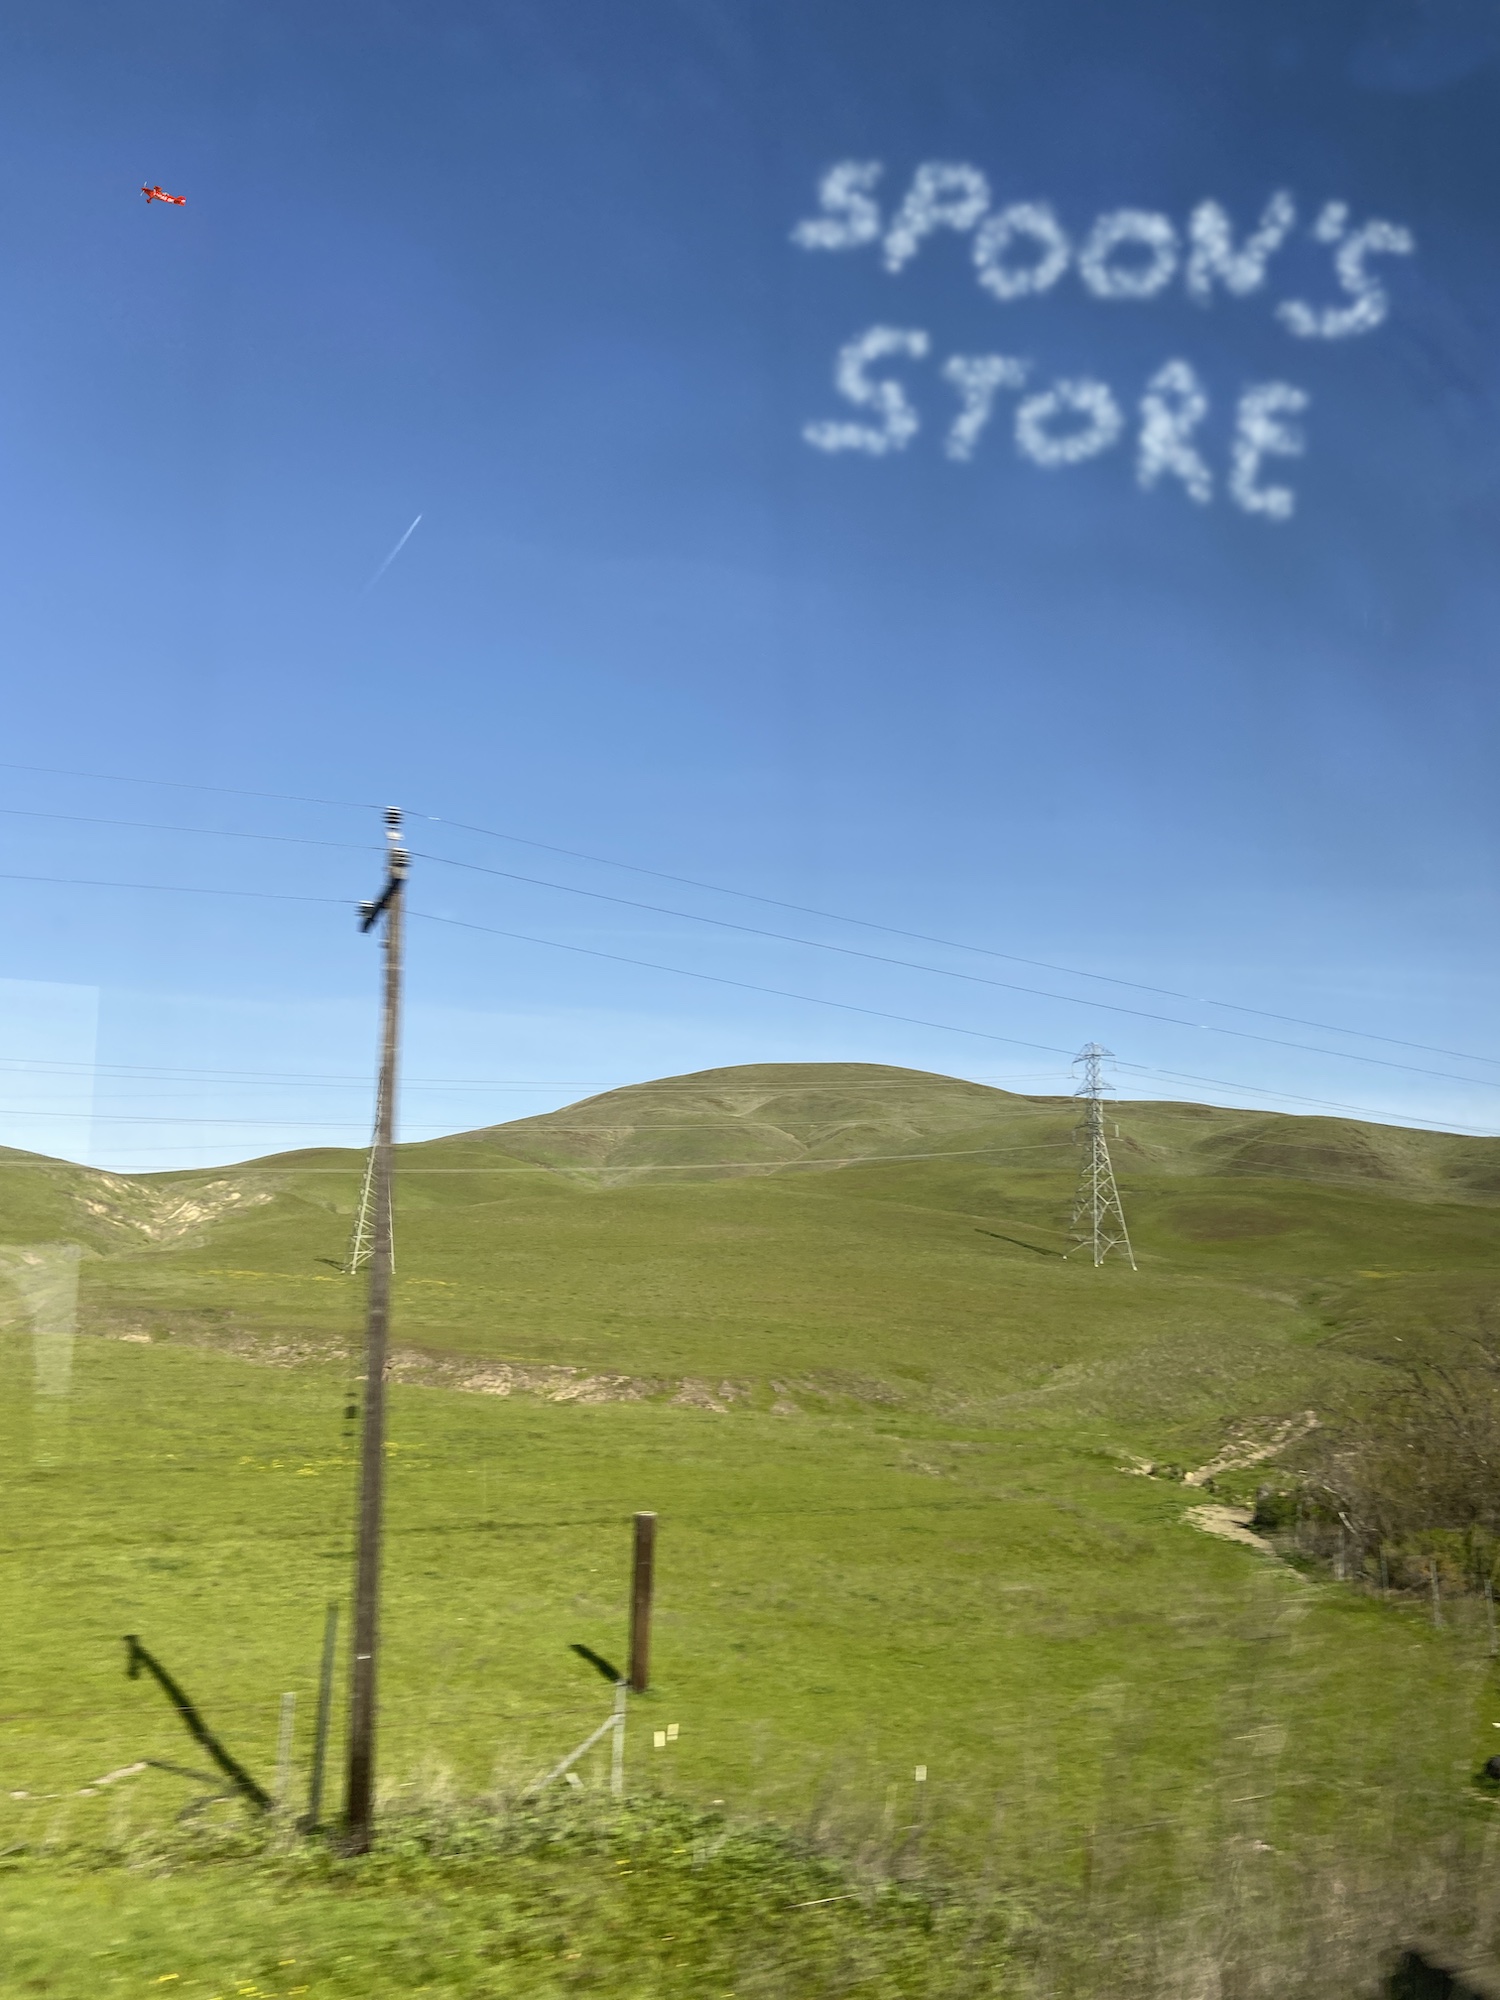 A green hill beneath a blue sky, with artificially superimposed skywriting letters that read Spoons Store.